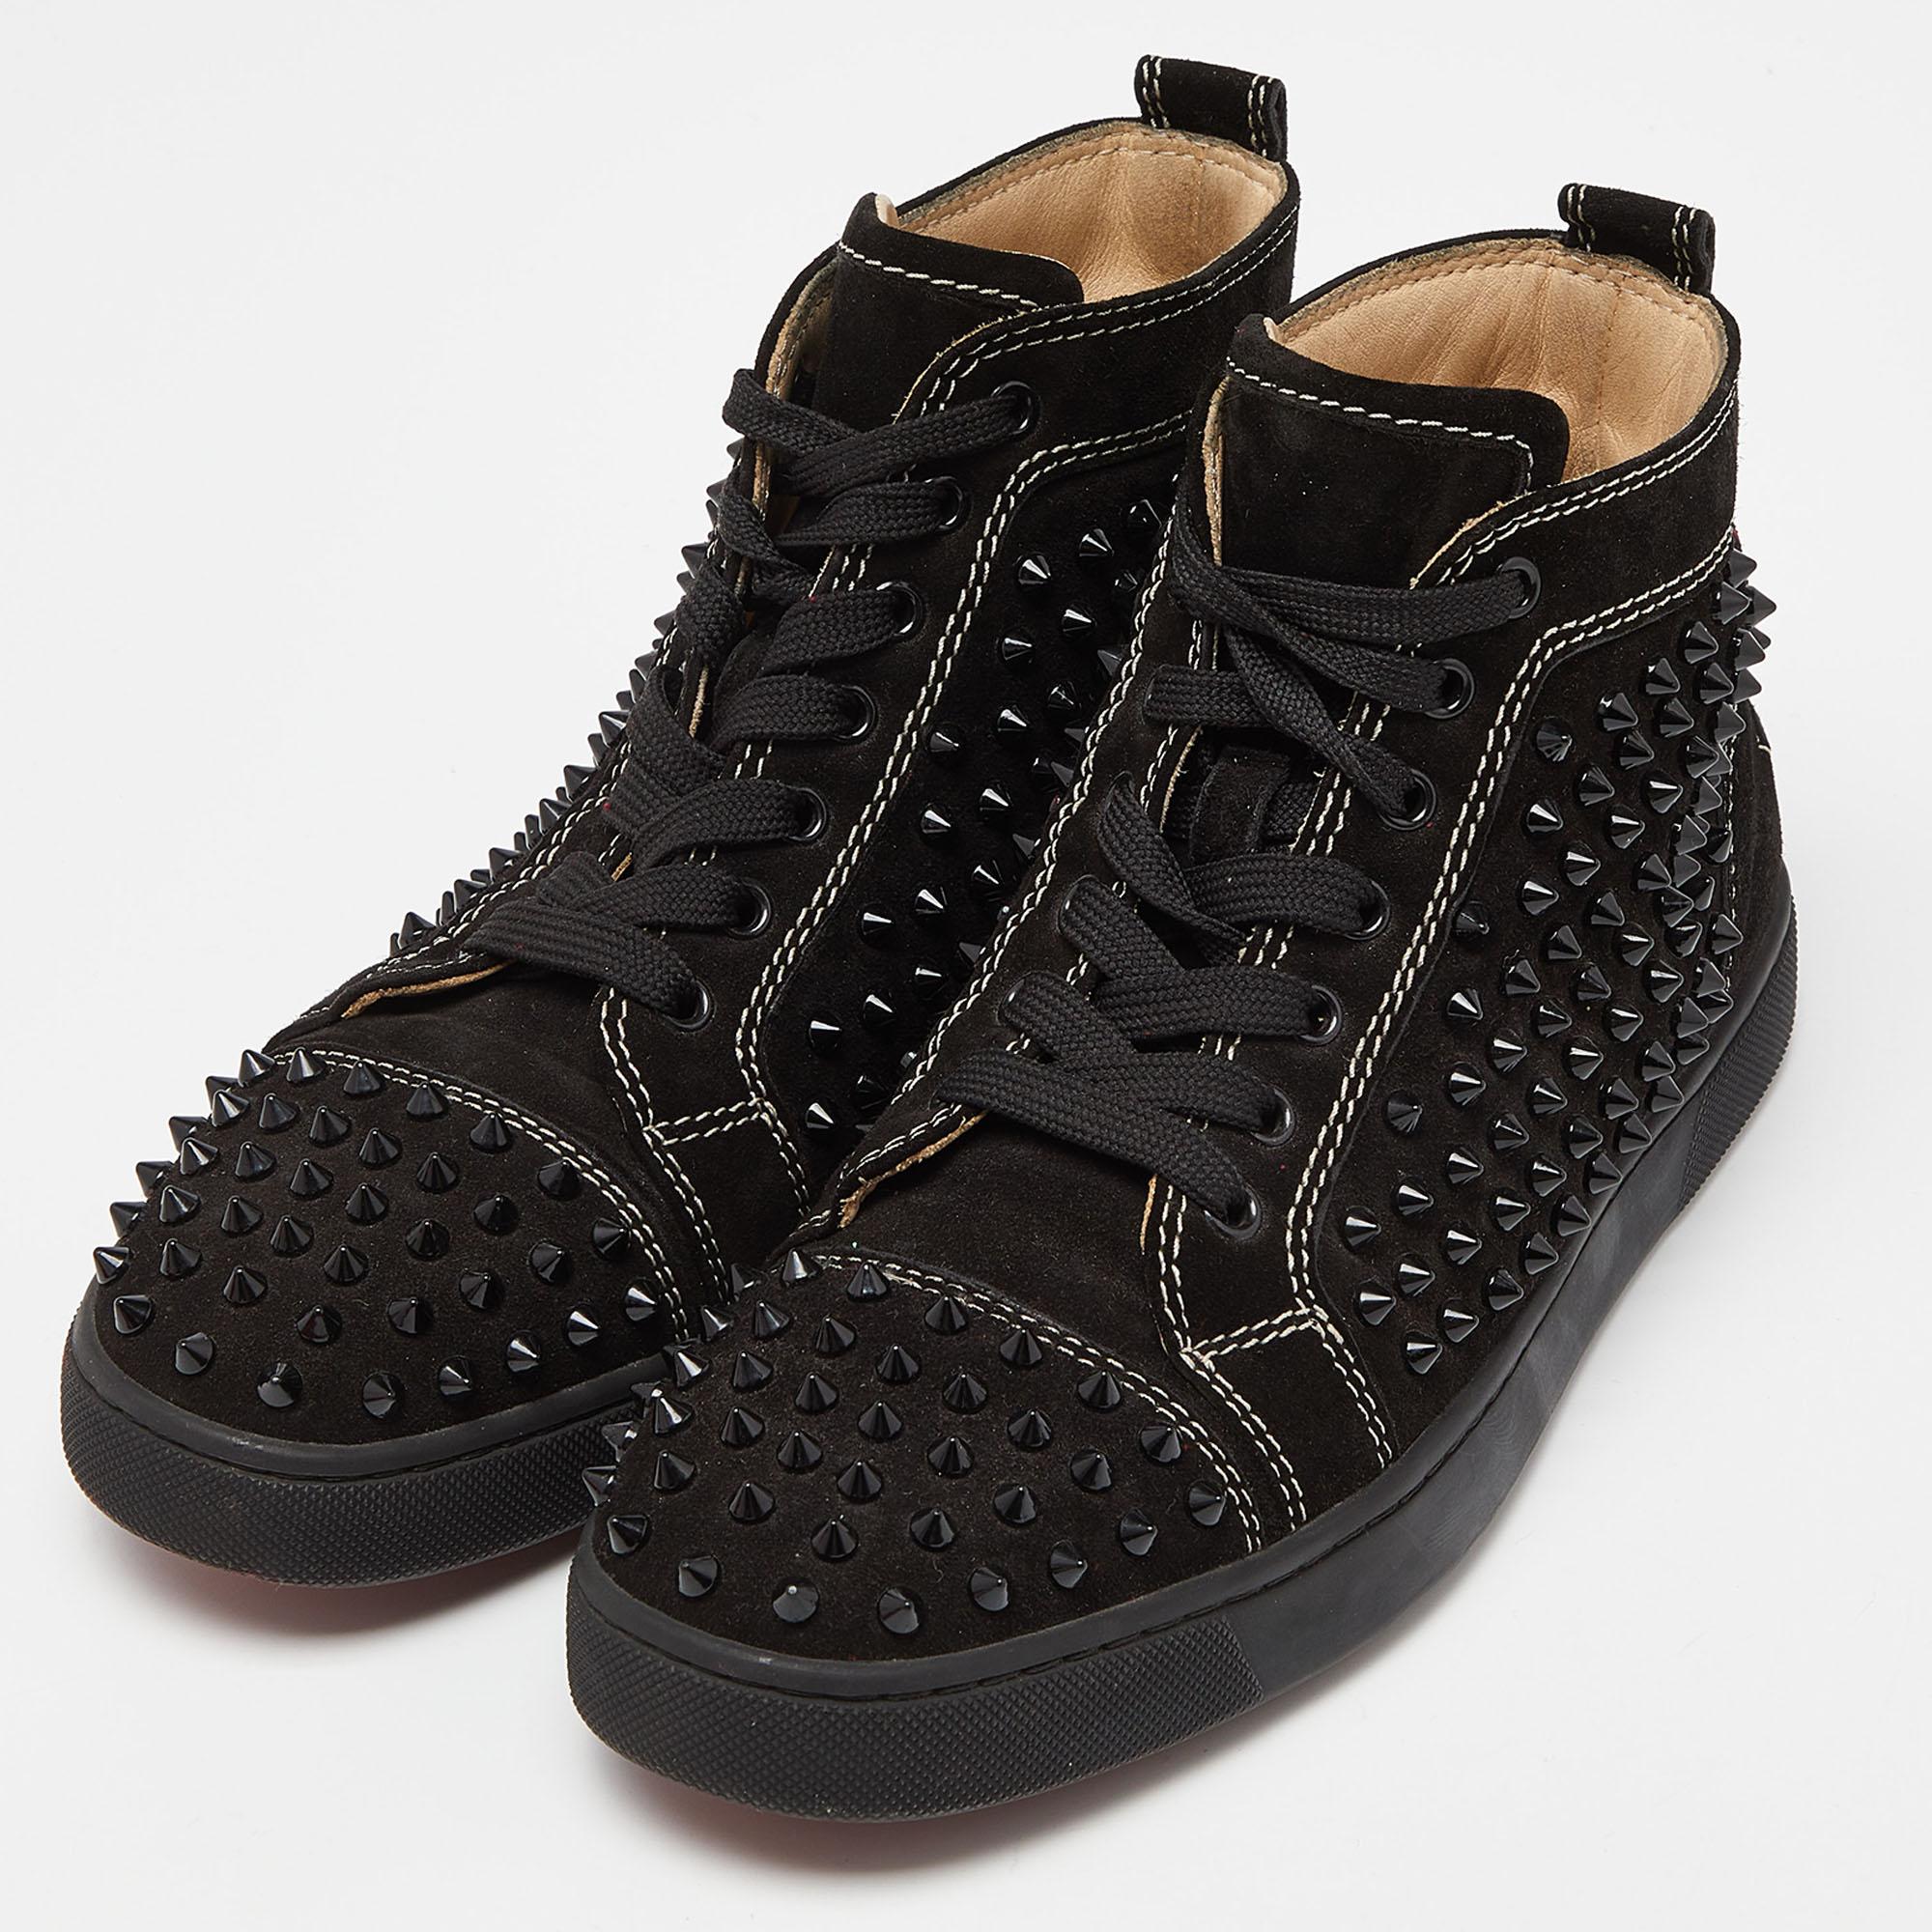 Christian Louboutin Black Suede Spike High Top Sneakers Size 40 For Sale 4